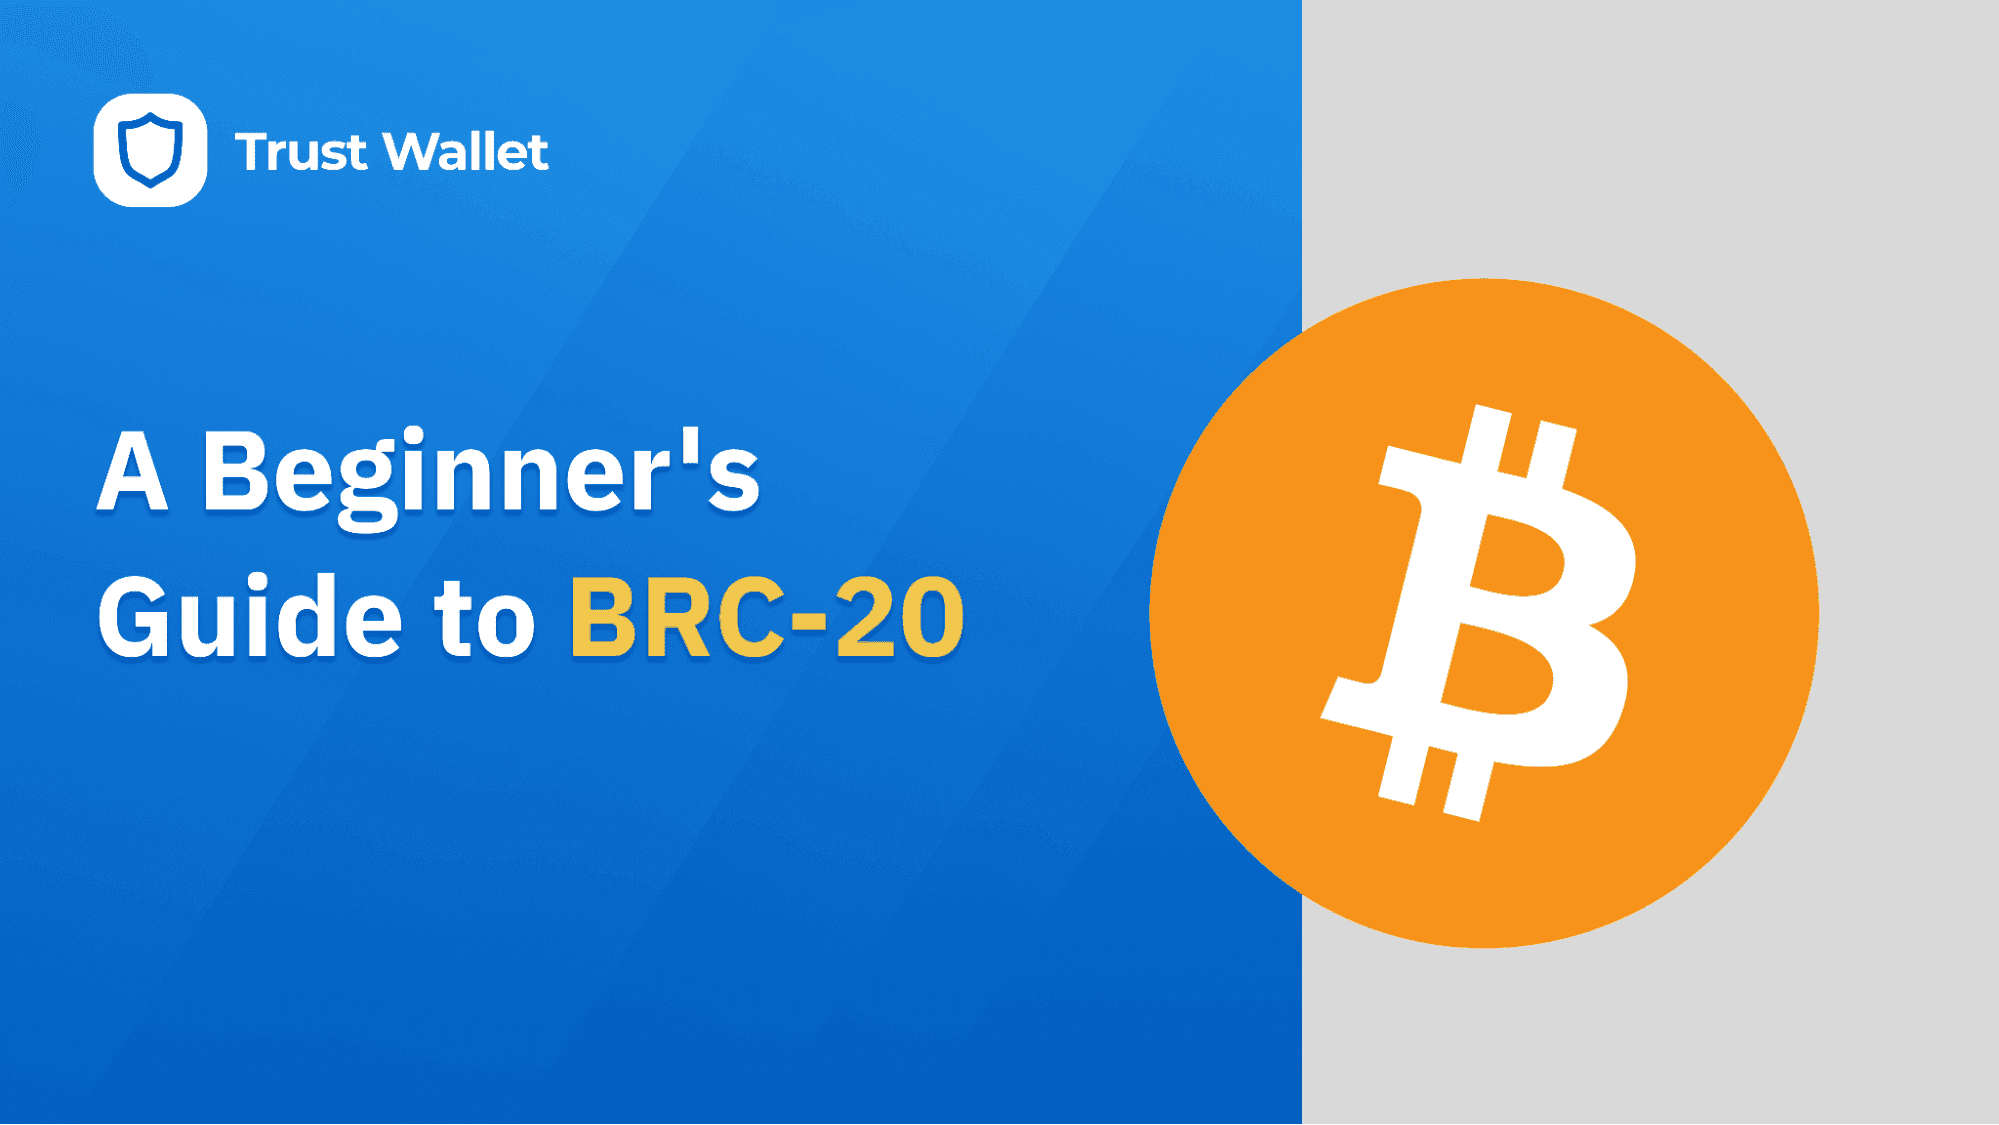 A Beginner's Guide to BRC-20